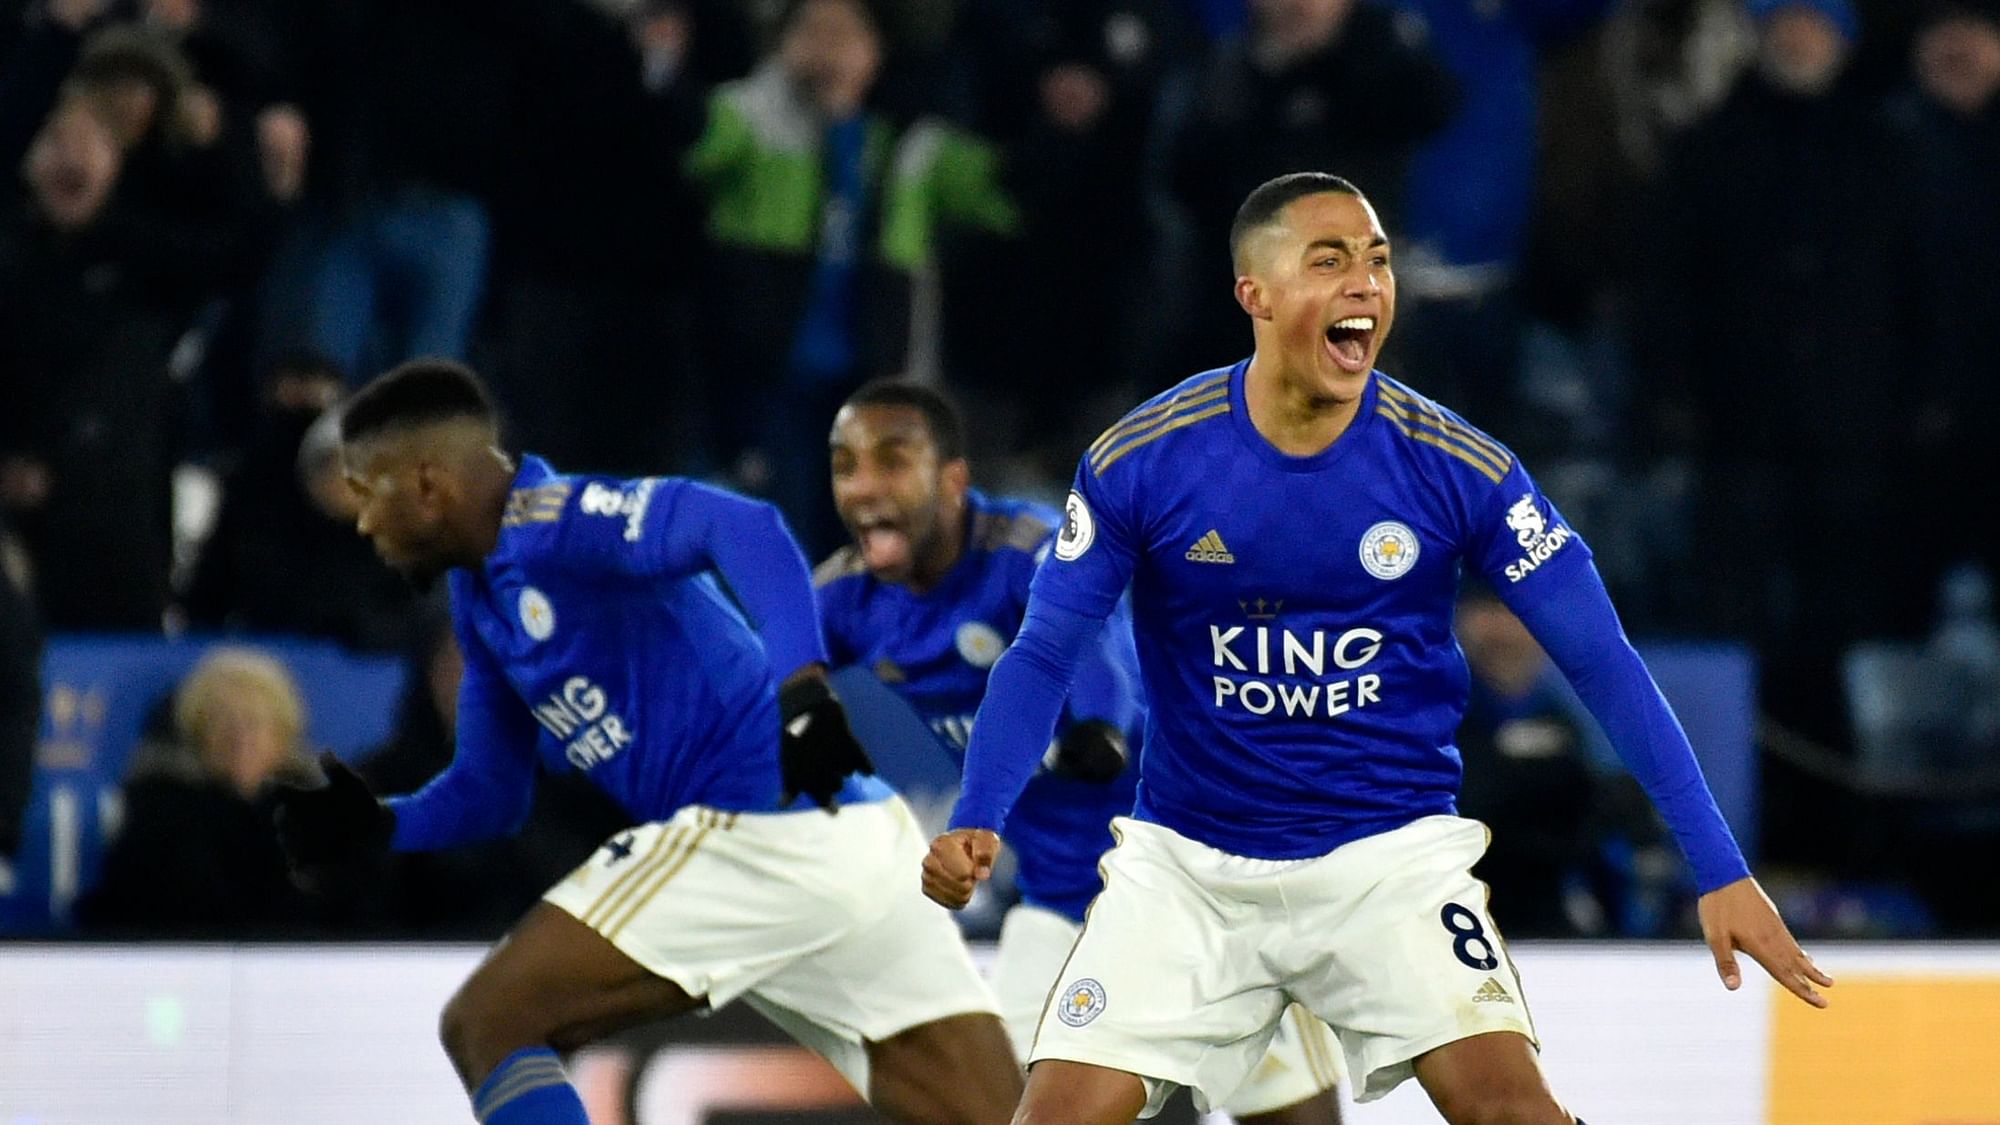 Leicester City players celebrate after Leicester’s Kelechi Iheanacho scored the winner against Everton at the King Power Stadium in Leicester, England.